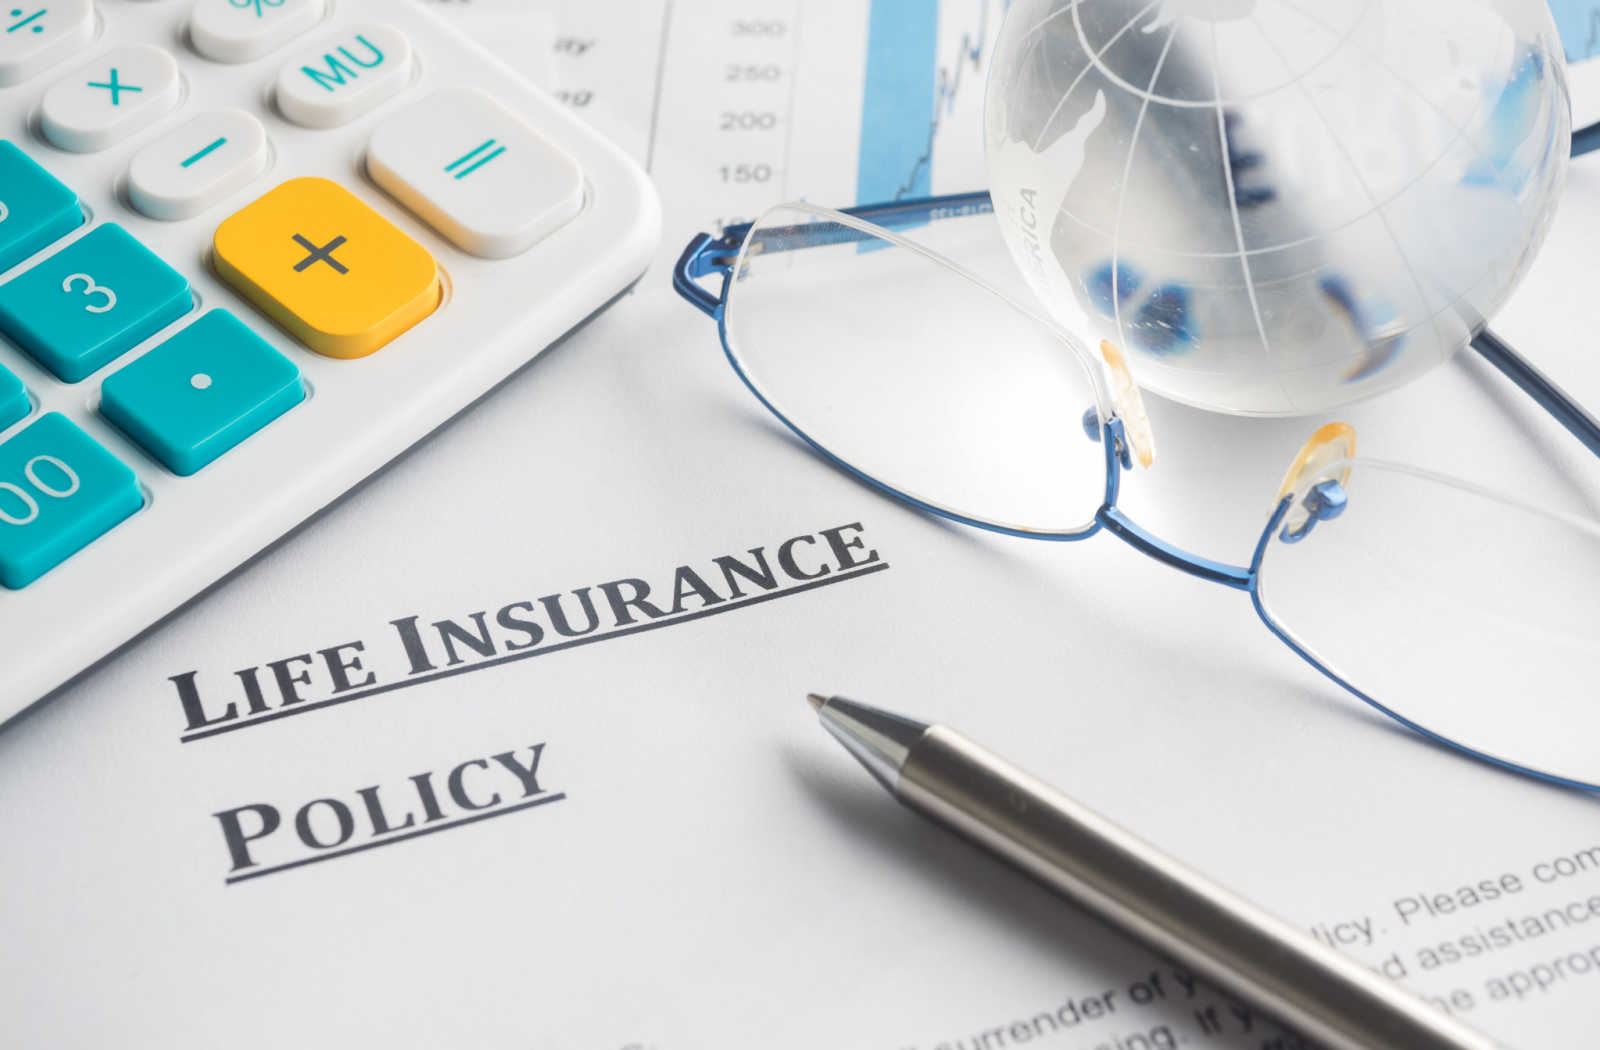 A life insurance policy laying on a desk with a pair of glasses and pen sitting on top